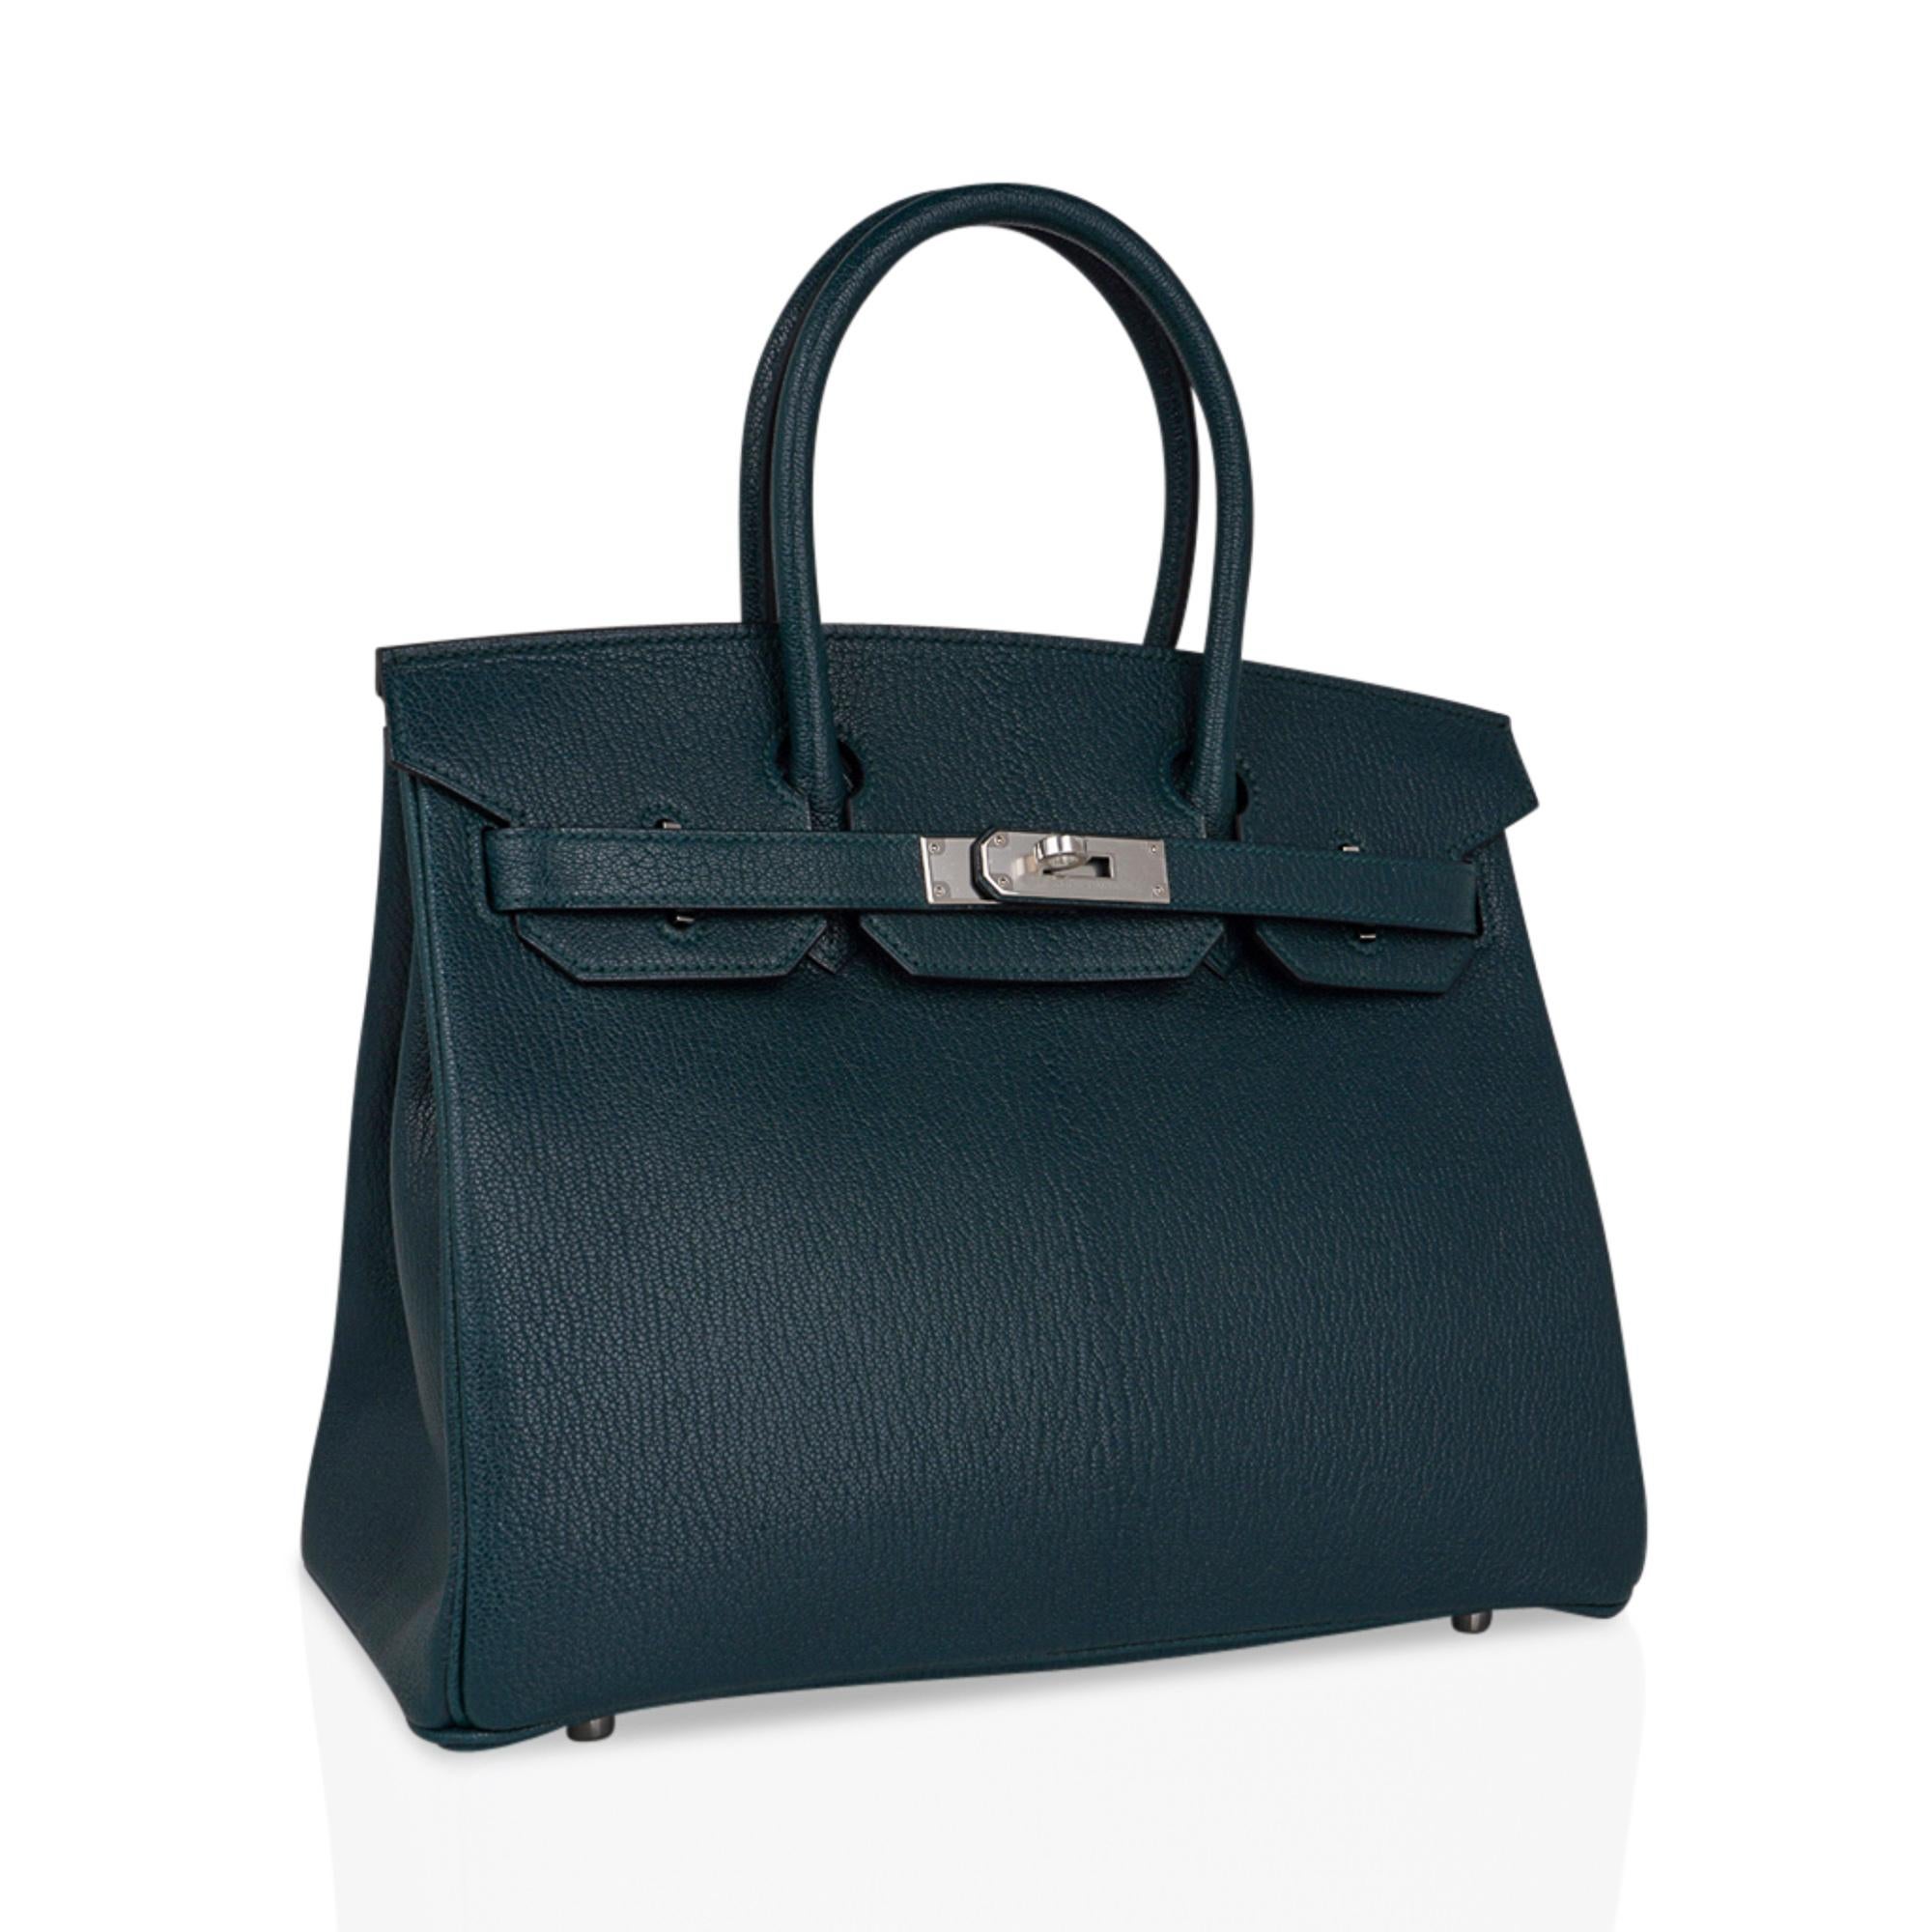 Mightychic offers an Hermes Birkin 30 bag featured in Vert Cypress.
Rare Chevre de Coromandel leather accentuates the beauty of this rich deep color.
Fresh with Palladium hardware.
Perfect for year round wear.
Comes with lock, keys, clochette,